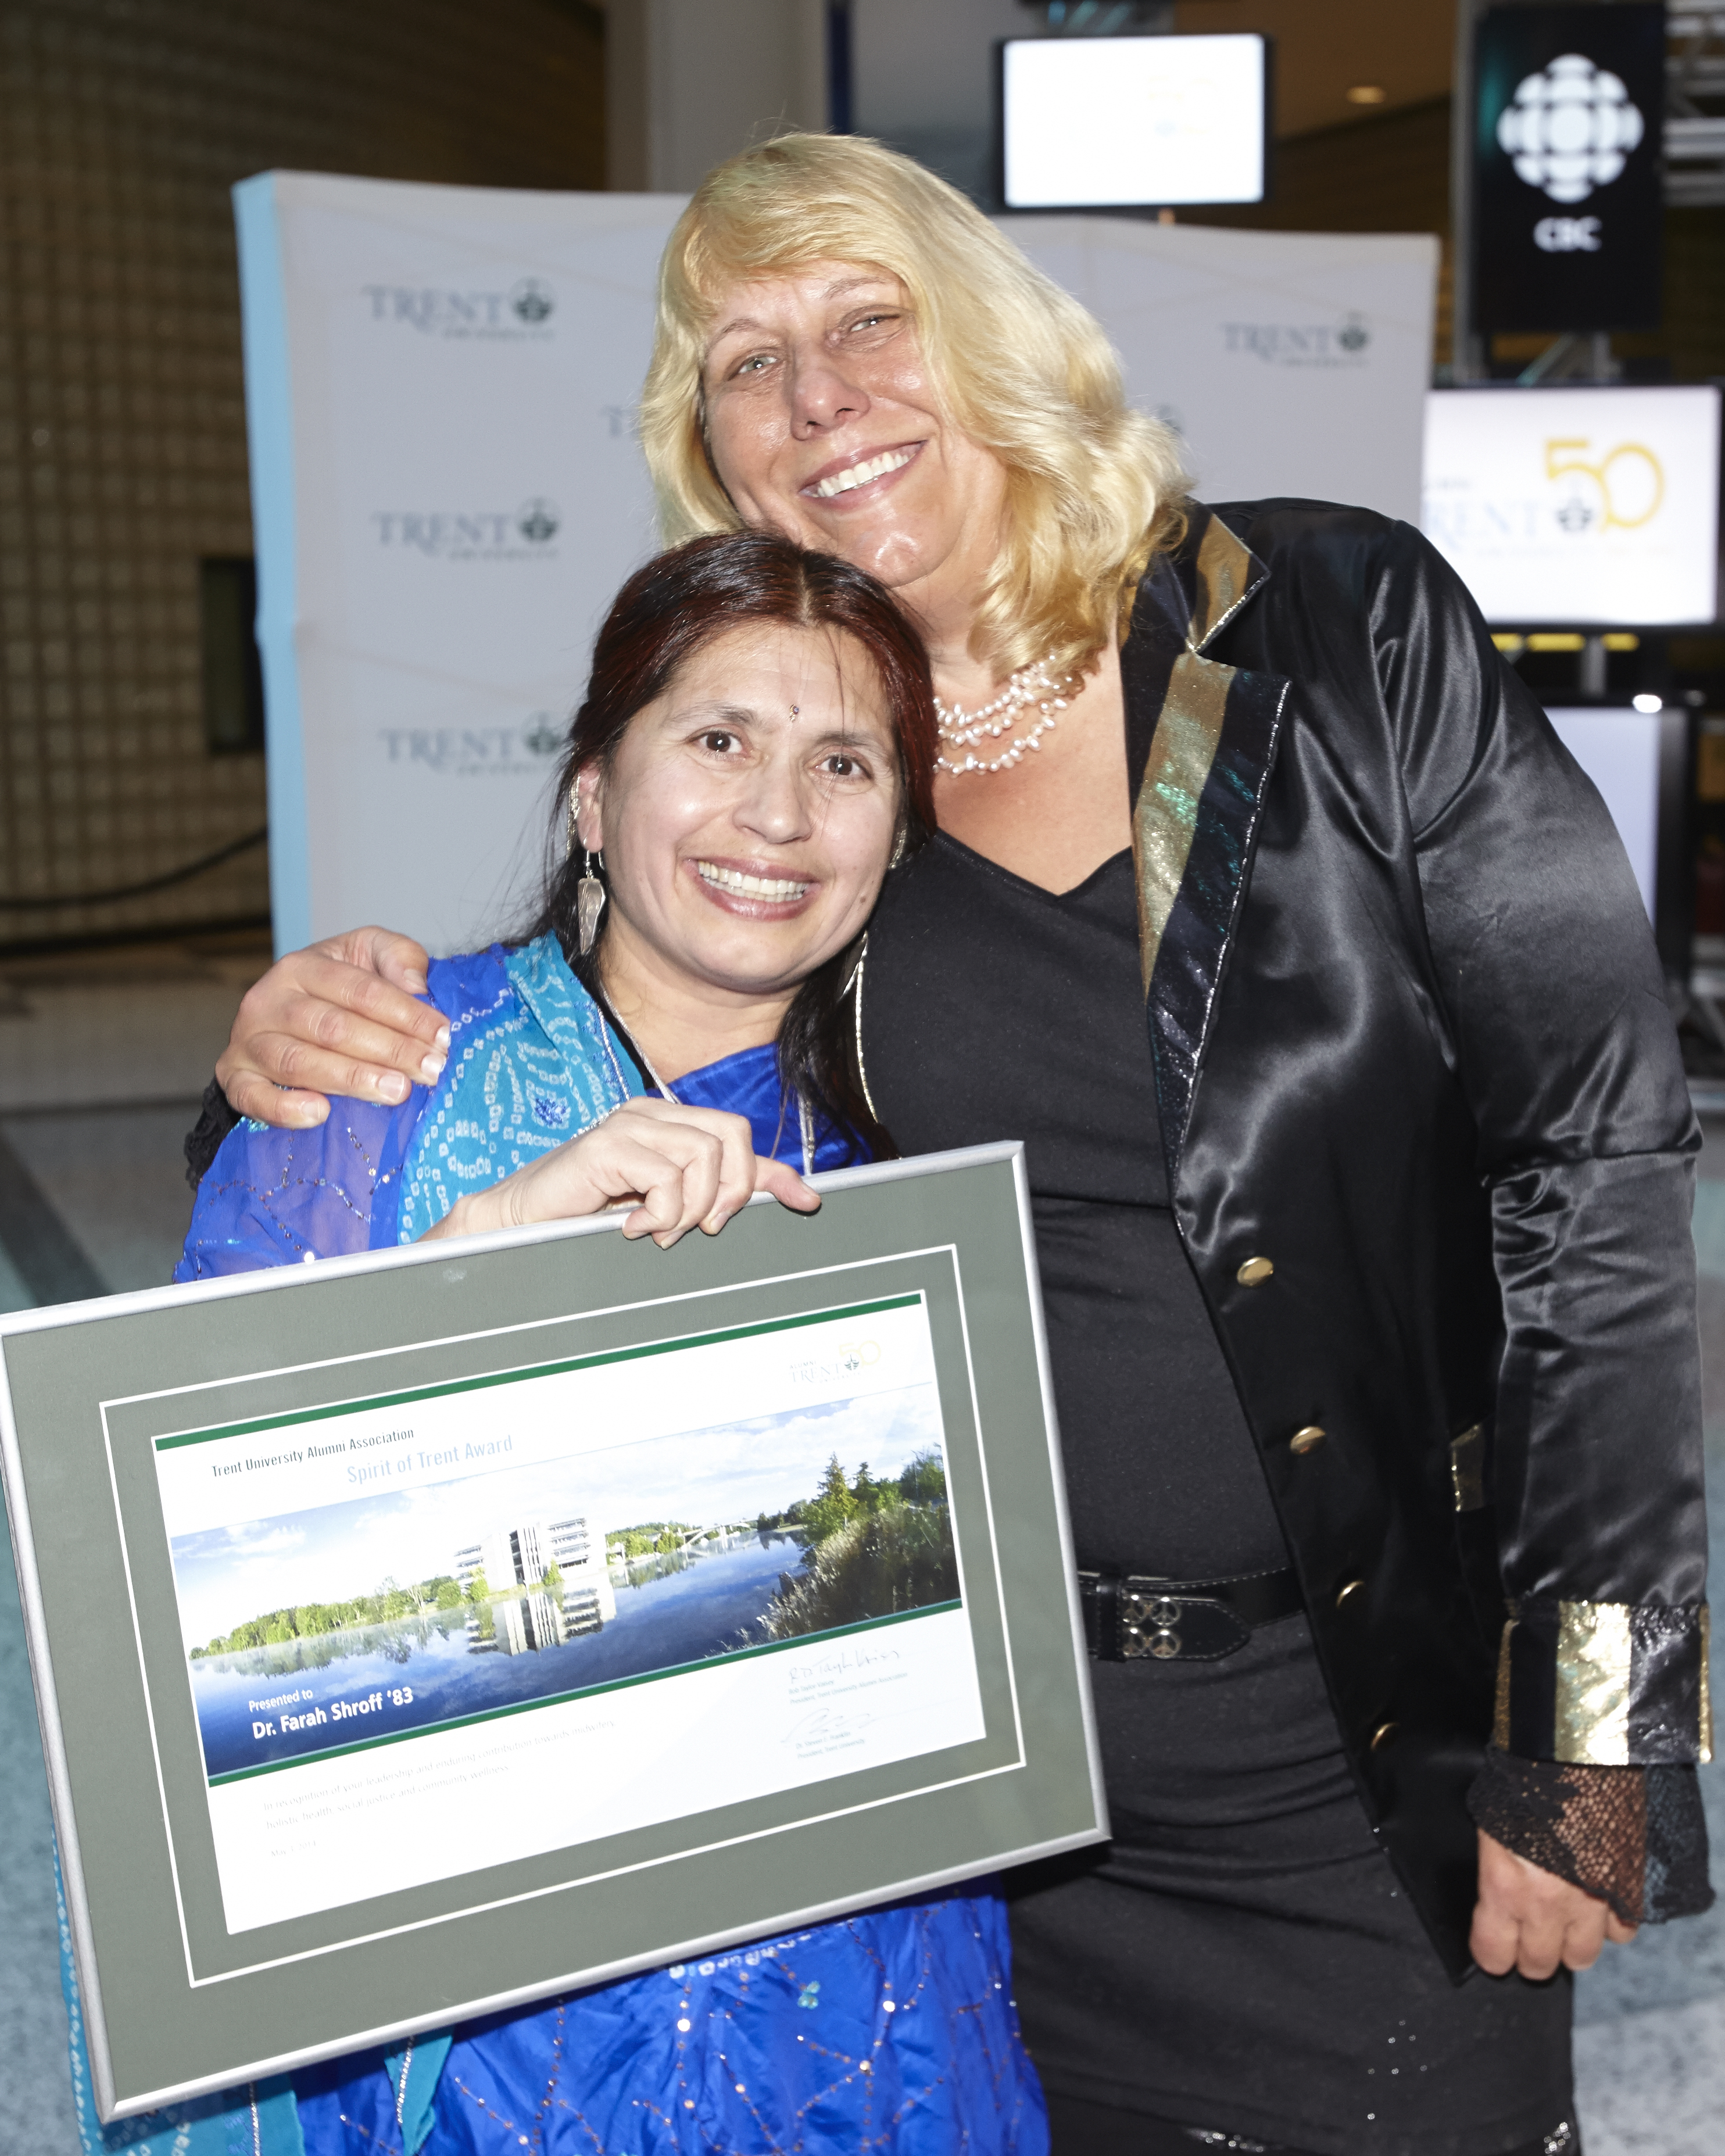 Two Alumni Award Recipient holding a framed picture of Trent University